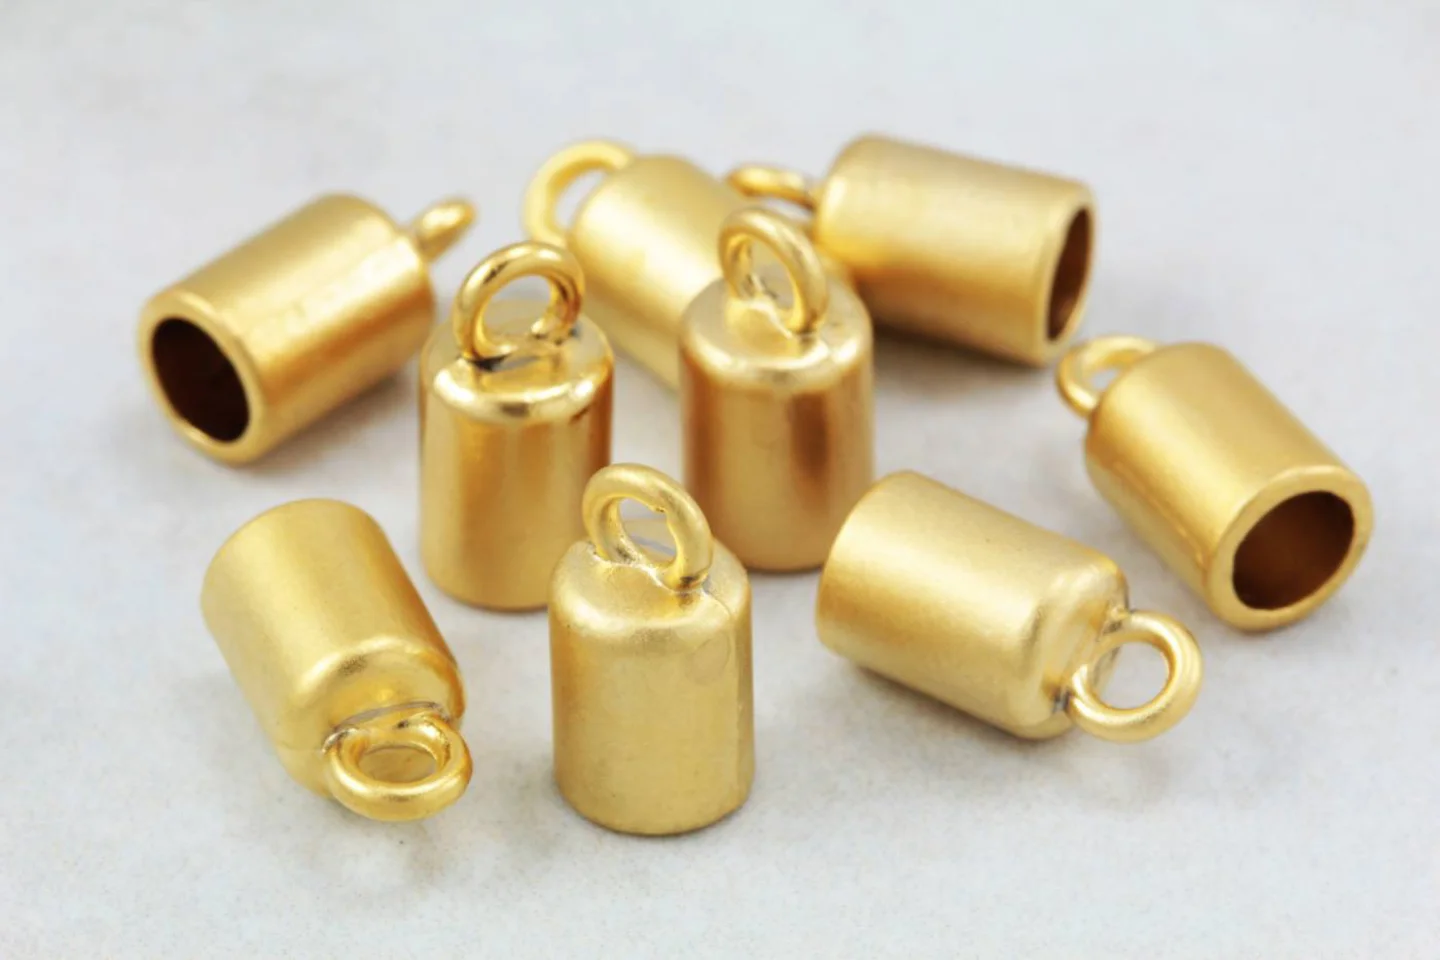 gold-metal-round-5mm-hole-end-caps.